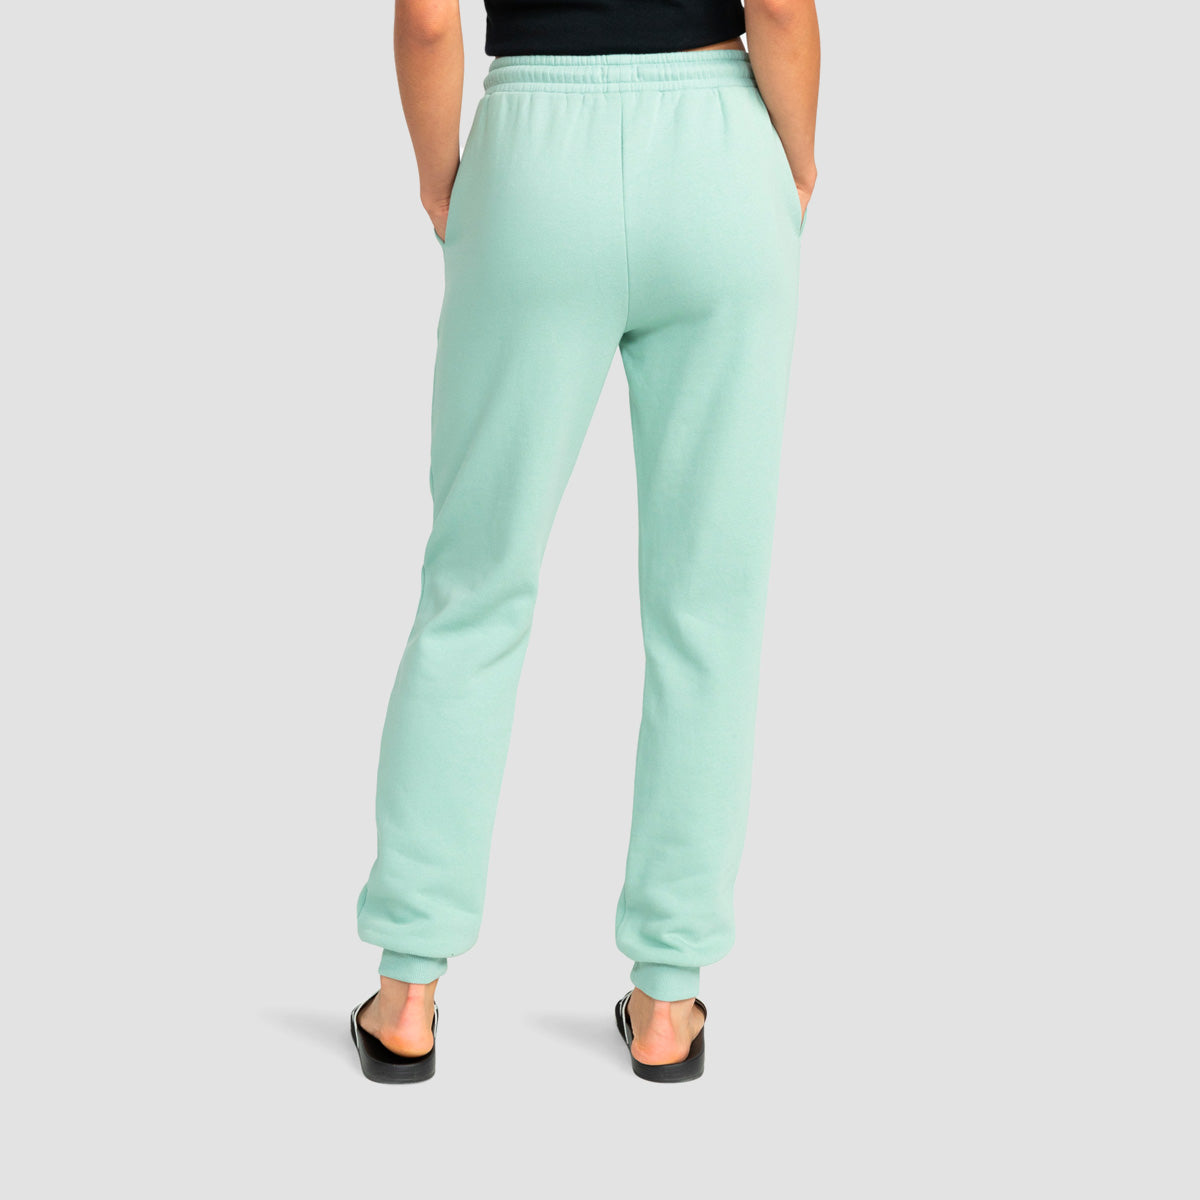 Roxy From Home Sweatpants Blue Surf - Womens